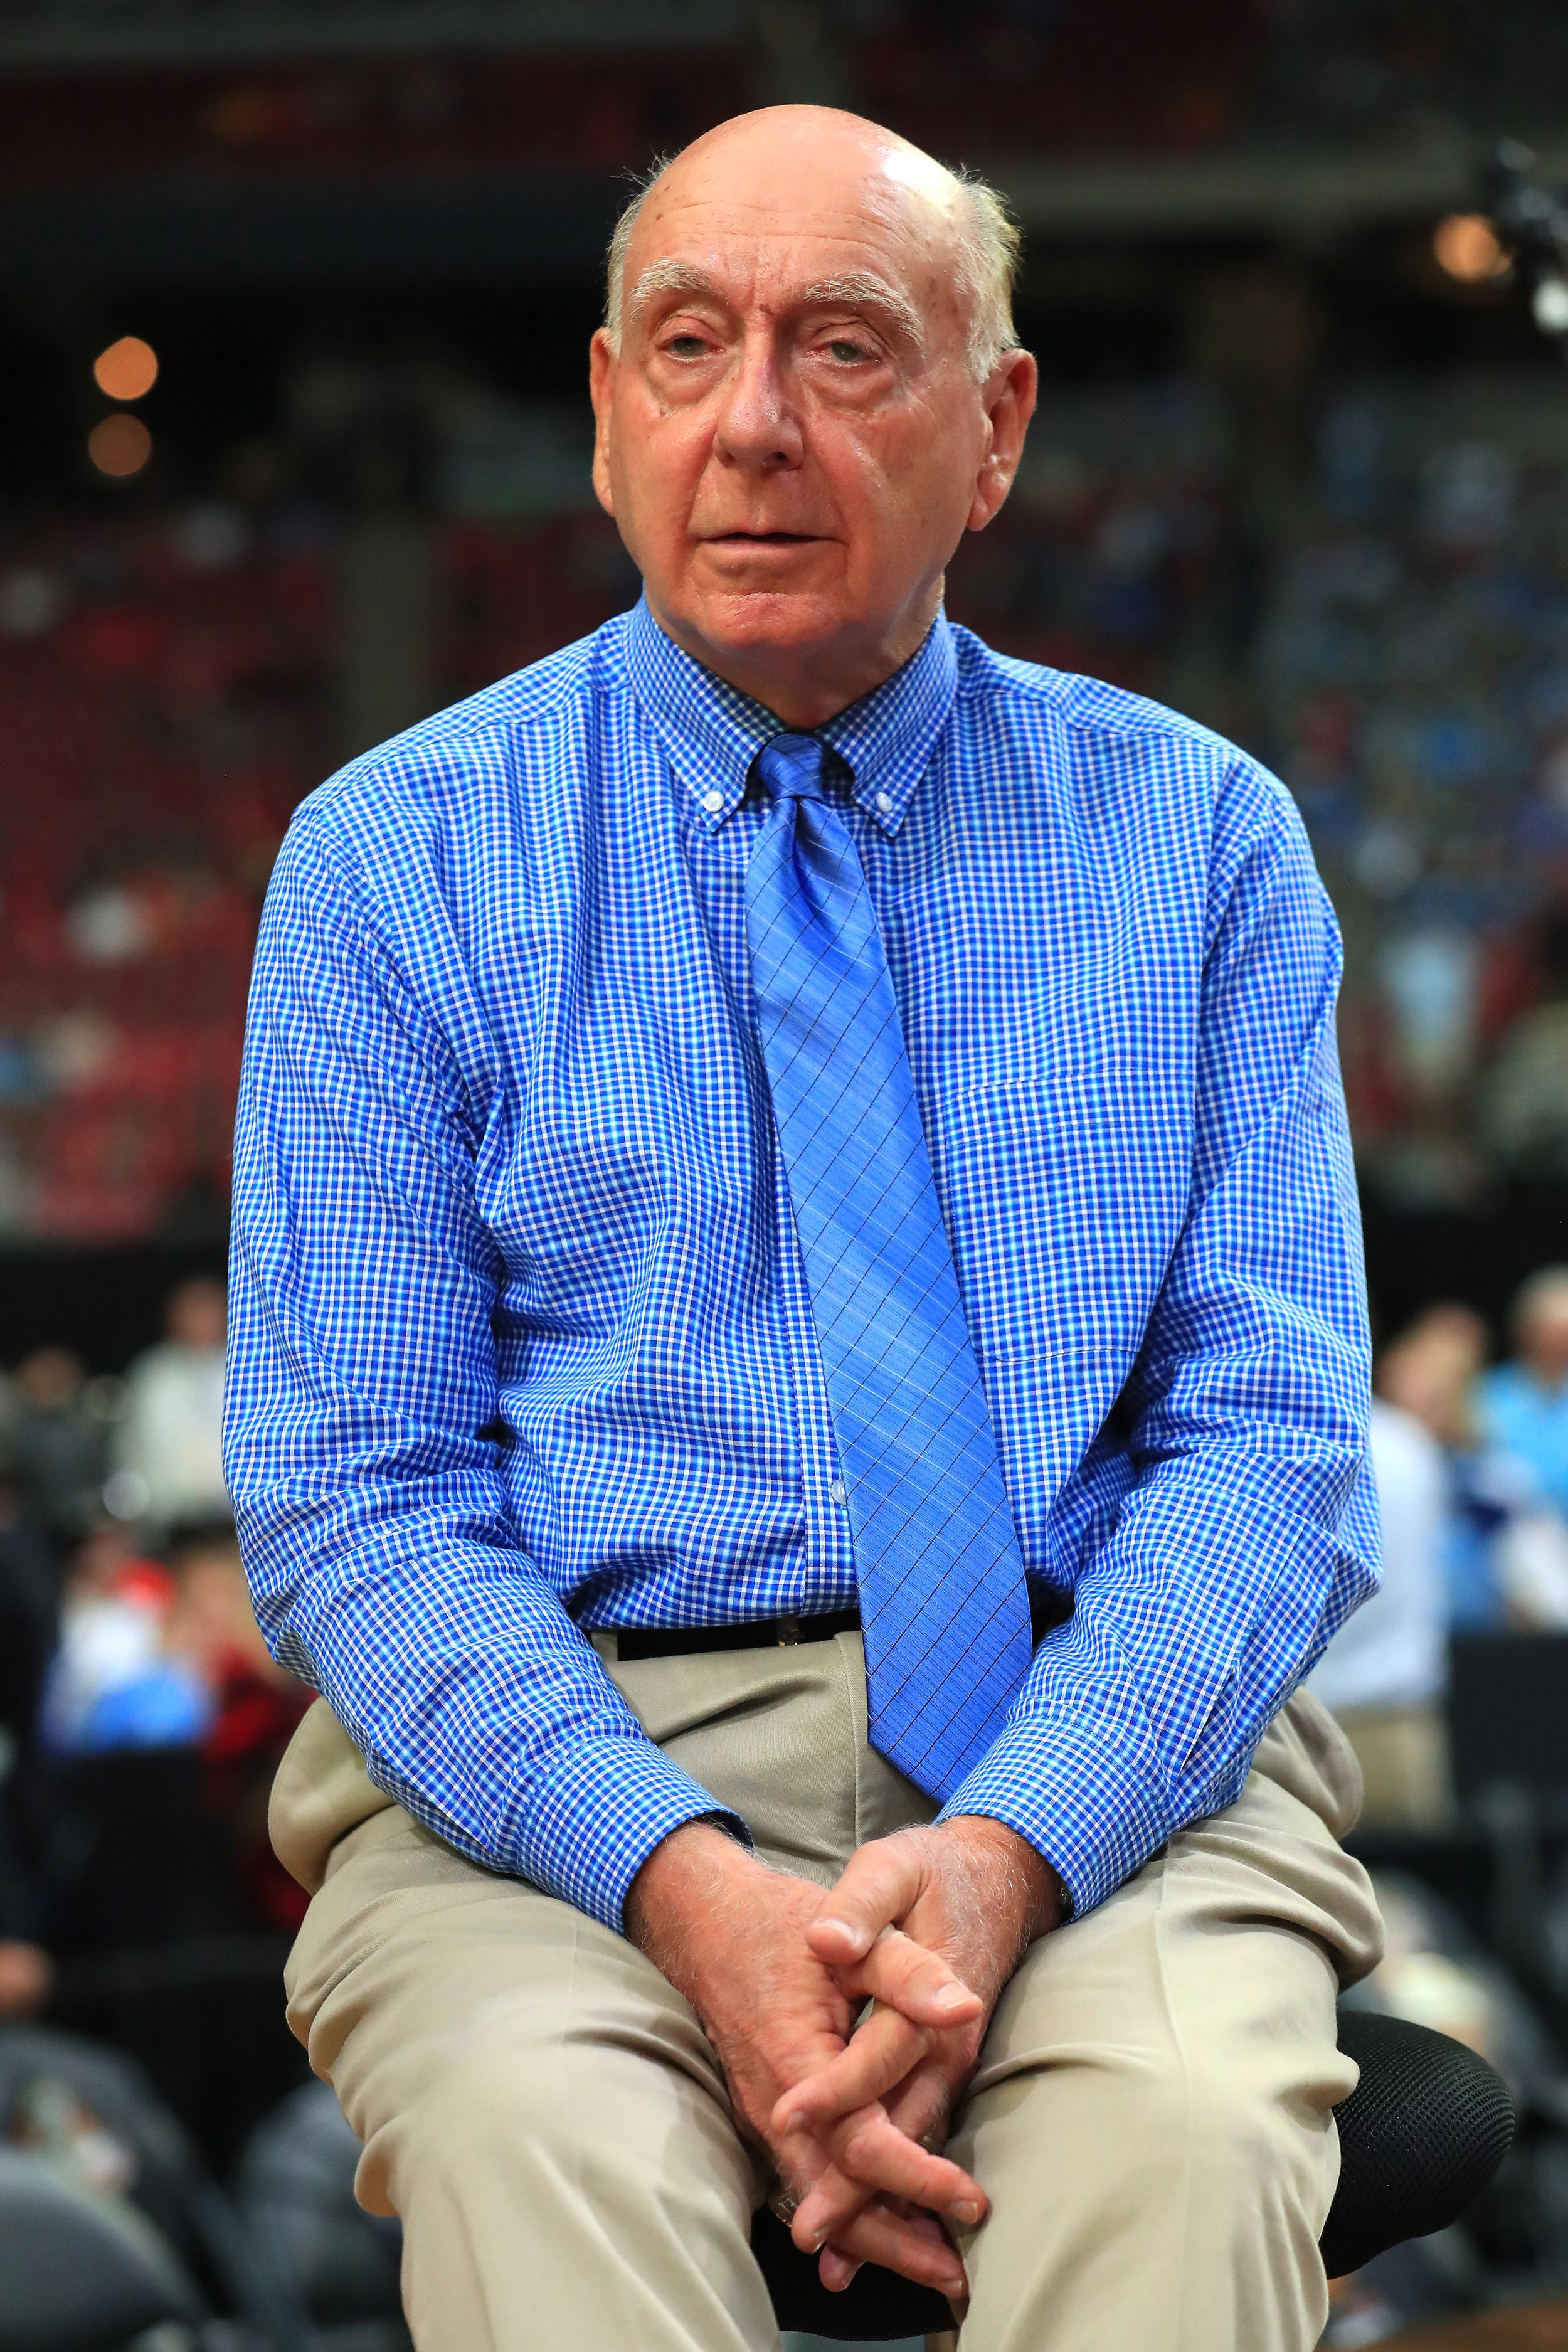 Dick Vitale says he has lymphoma and will have chemotherapy | CNN